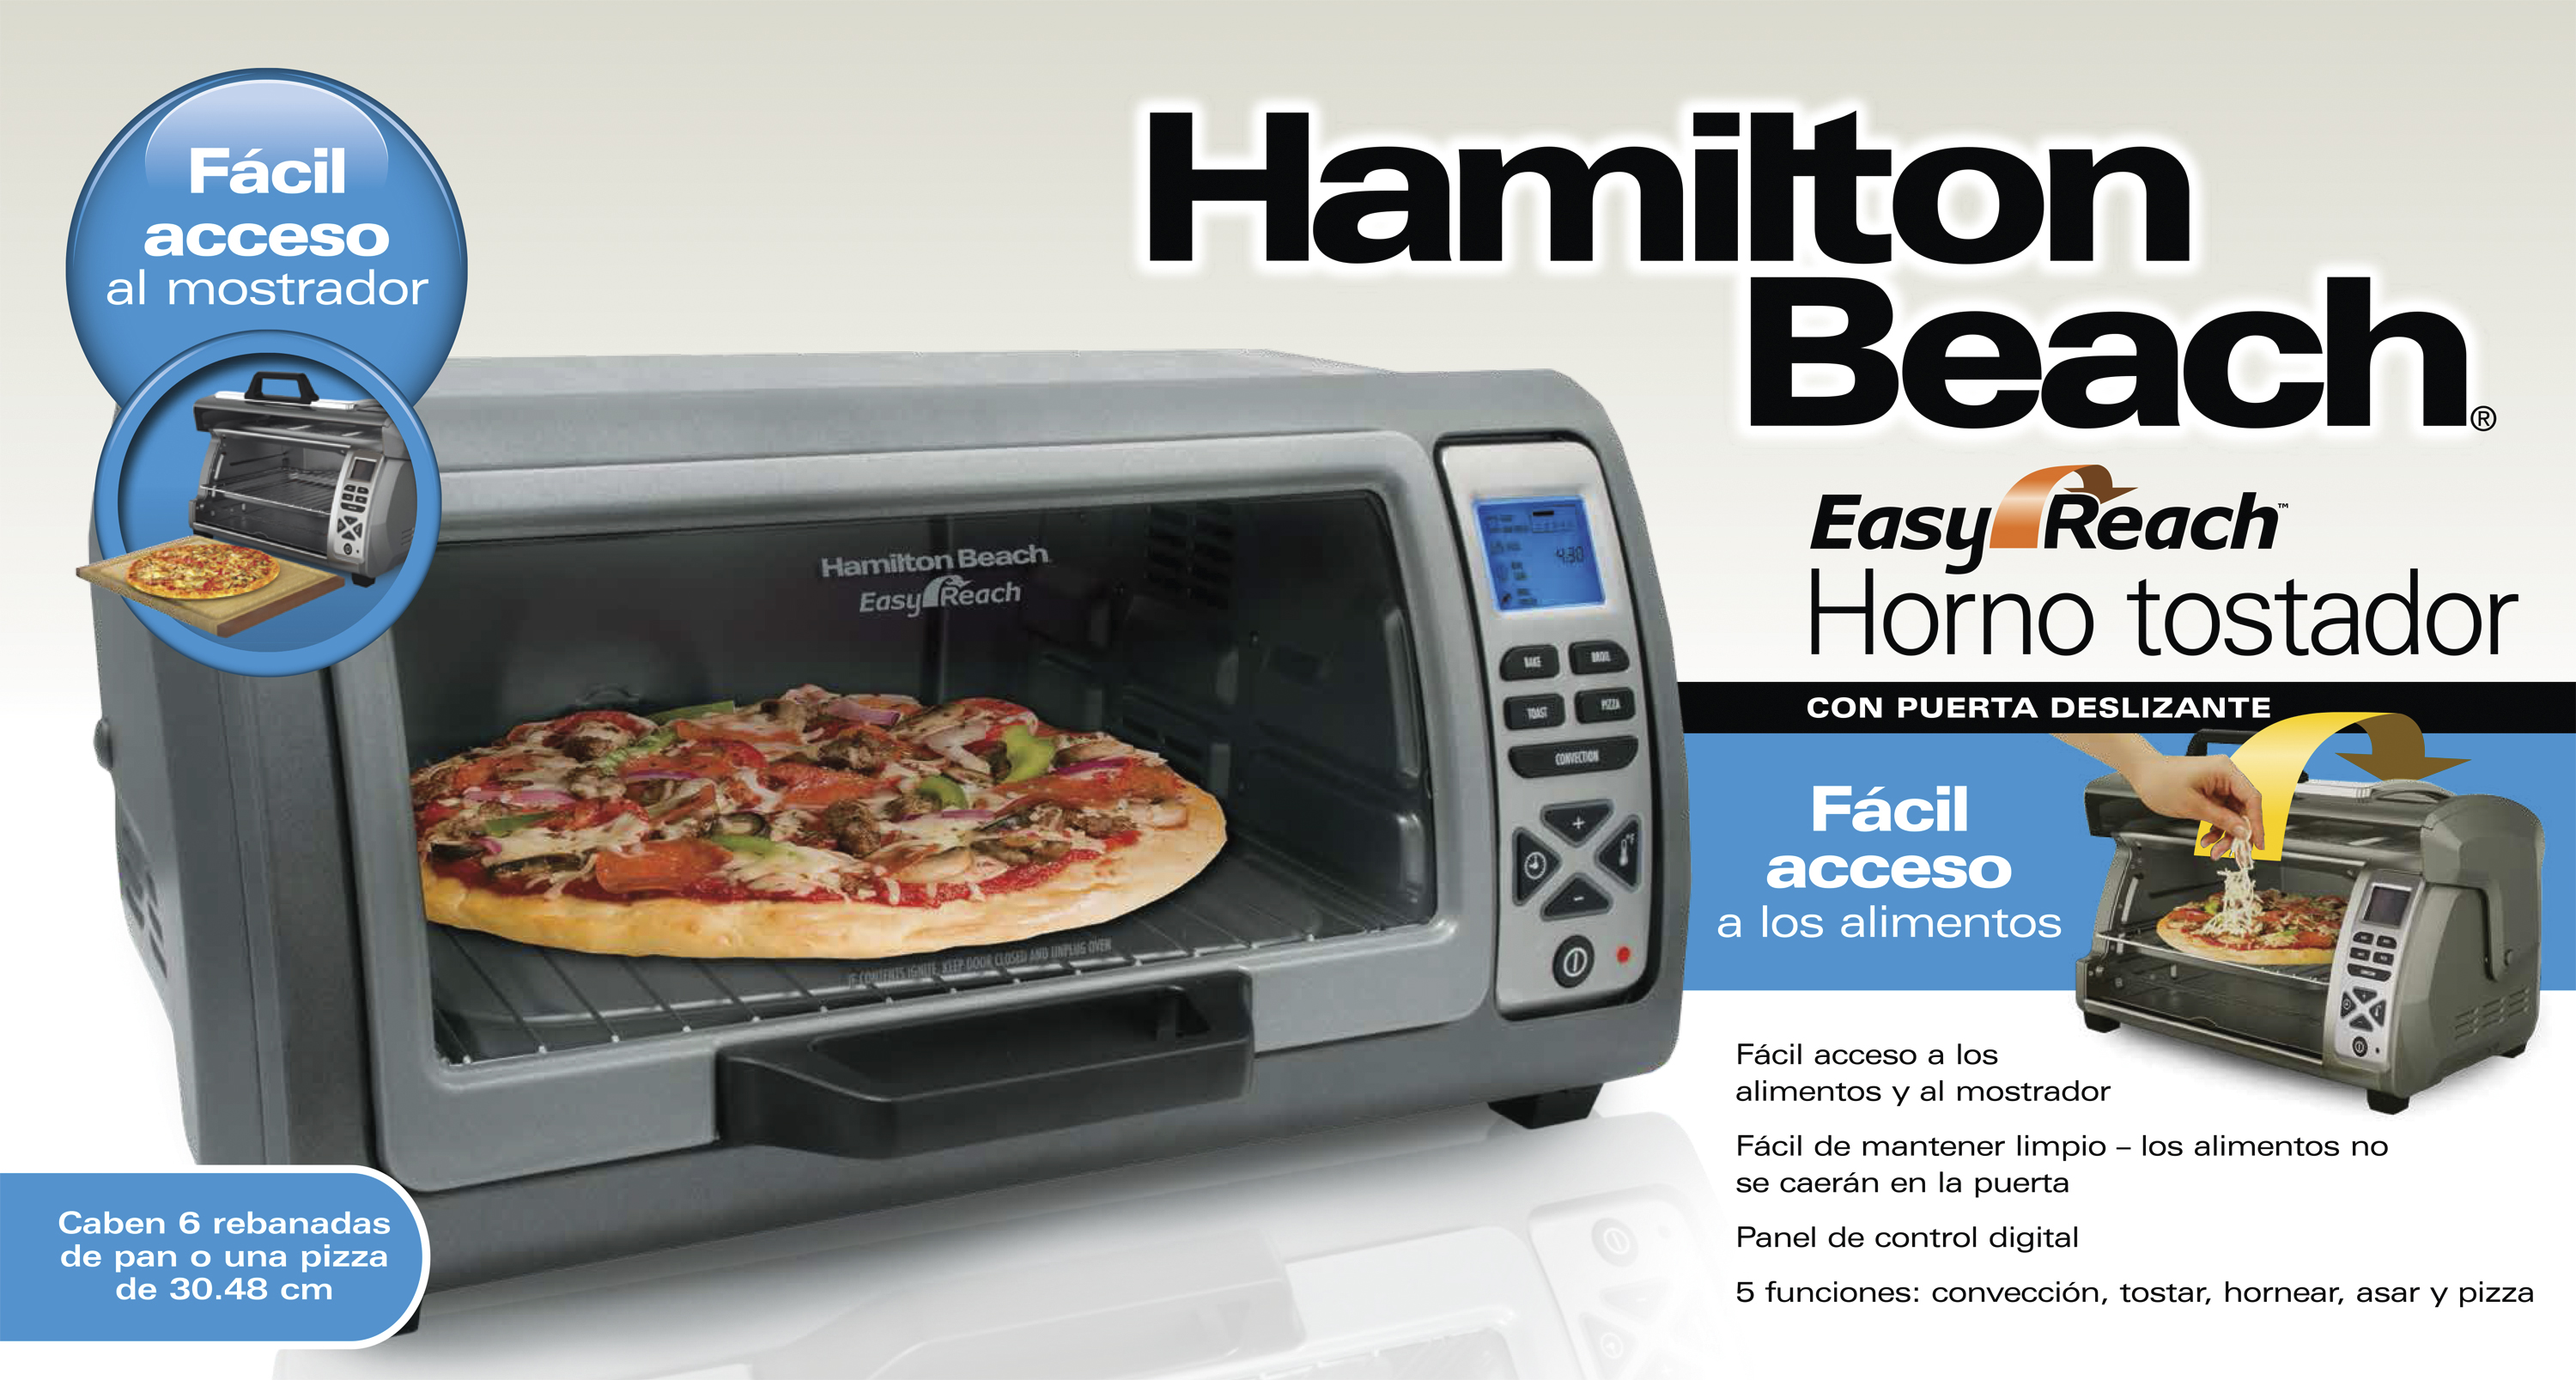 Hamilton Beach Easy Reach Toaster Oven with Roll-Top Door, Silver, 31128 - image 3 of 9